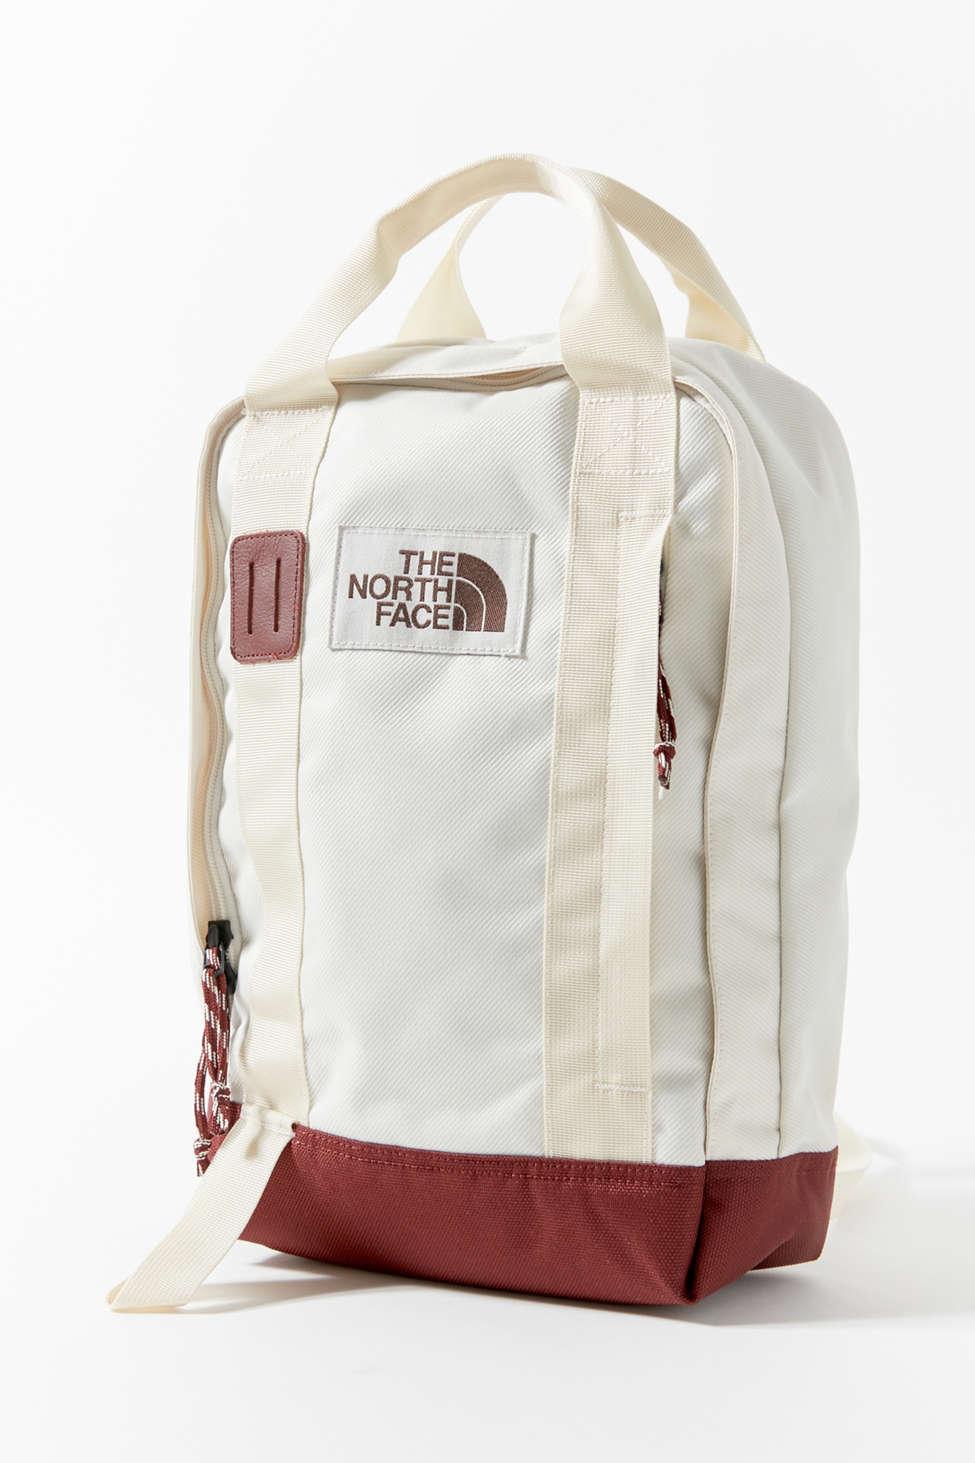 The North Face The North Face Tote Backpack | Lyst Canada